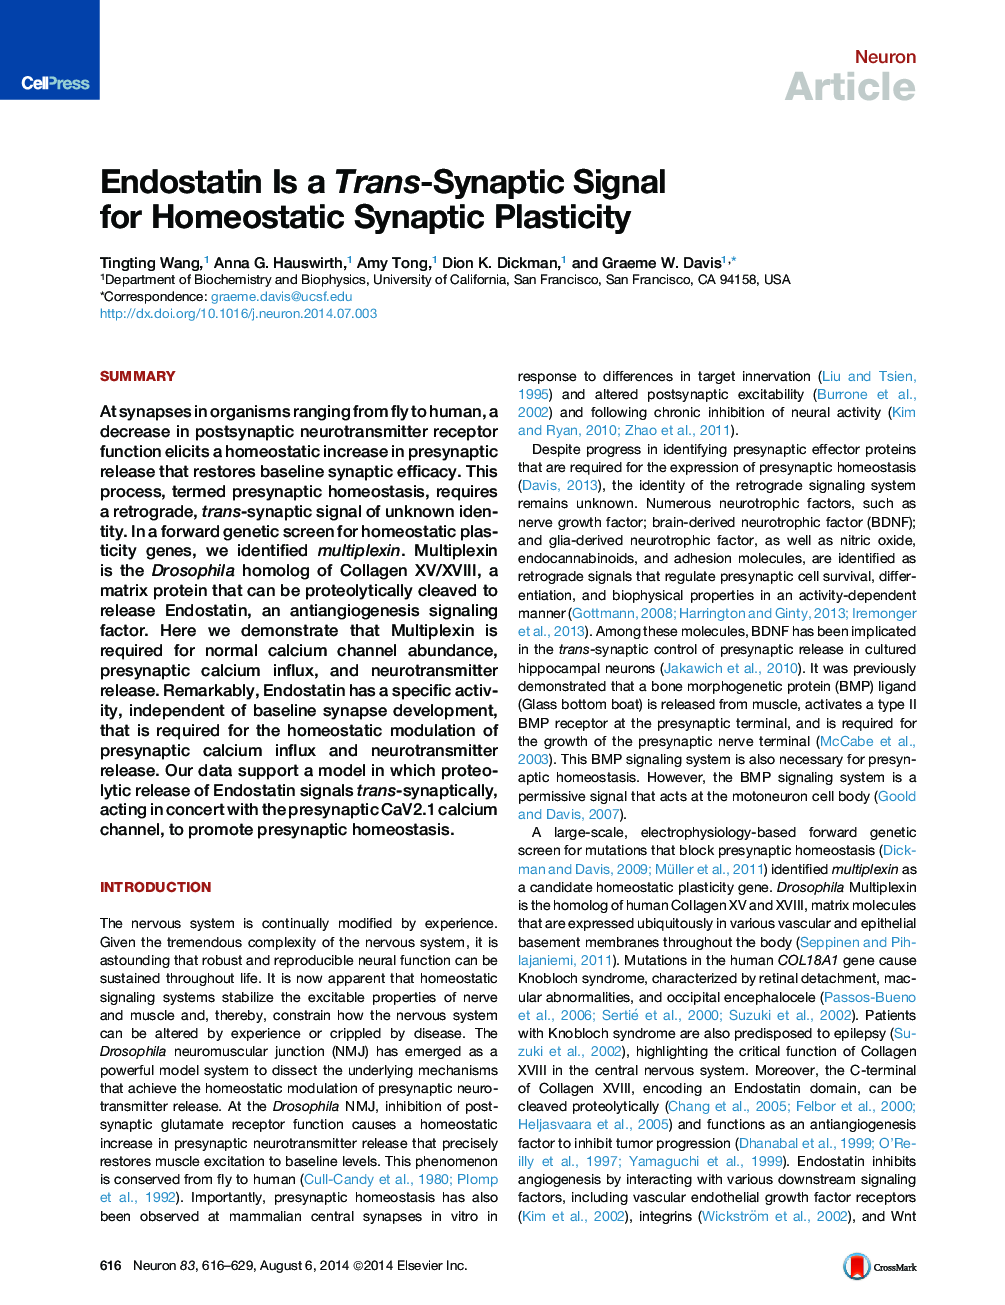 Endostatin Is a Trans-Synaptic Signal for Homeostatic Synaptic Plasticity